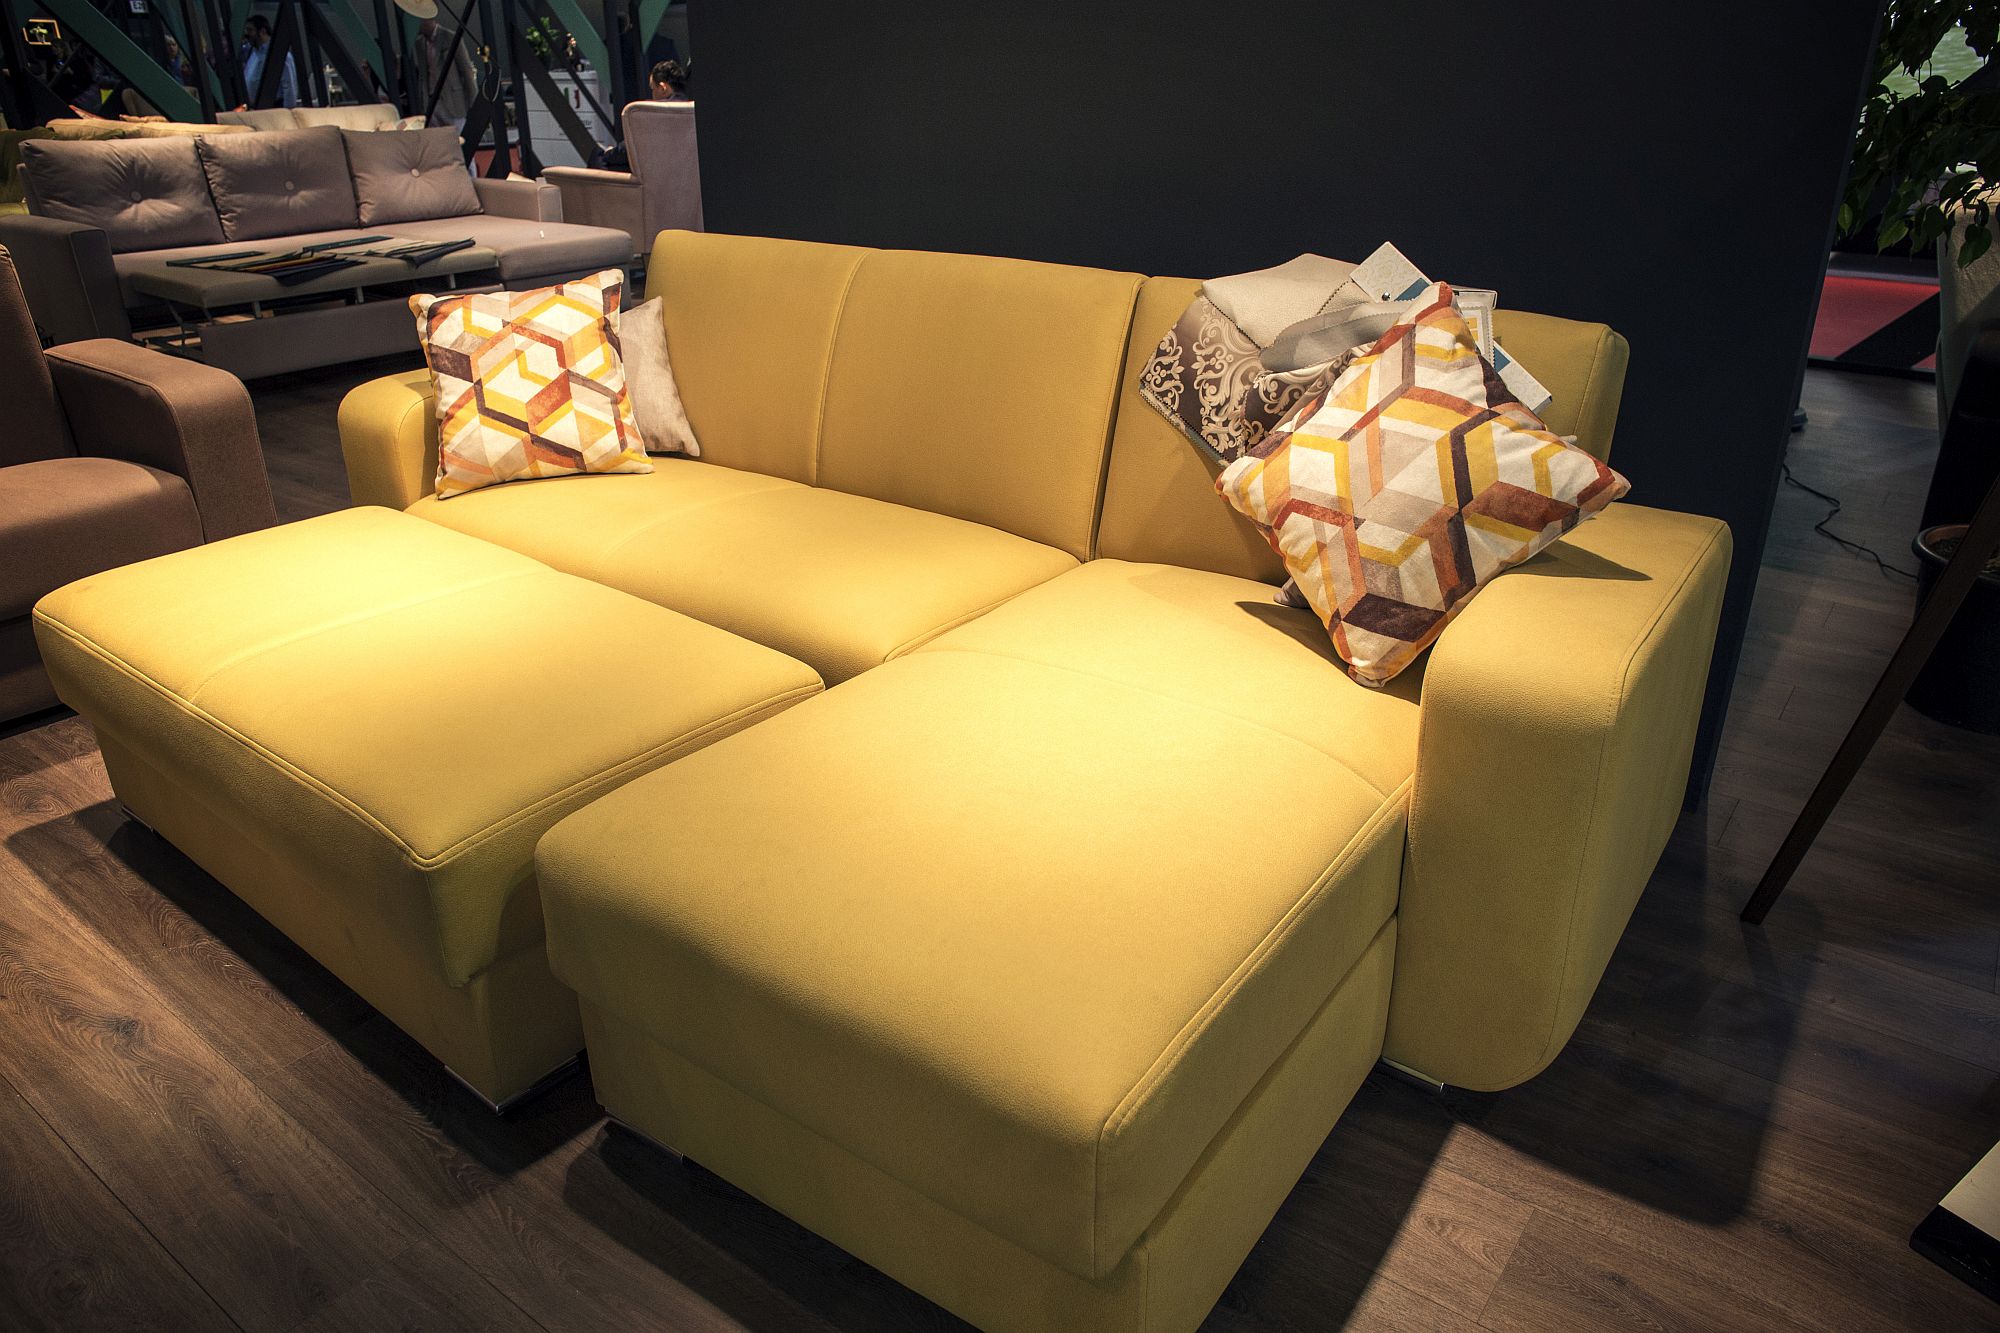 Adaptable units allow you to create a dynamic sofa that changes with your needs